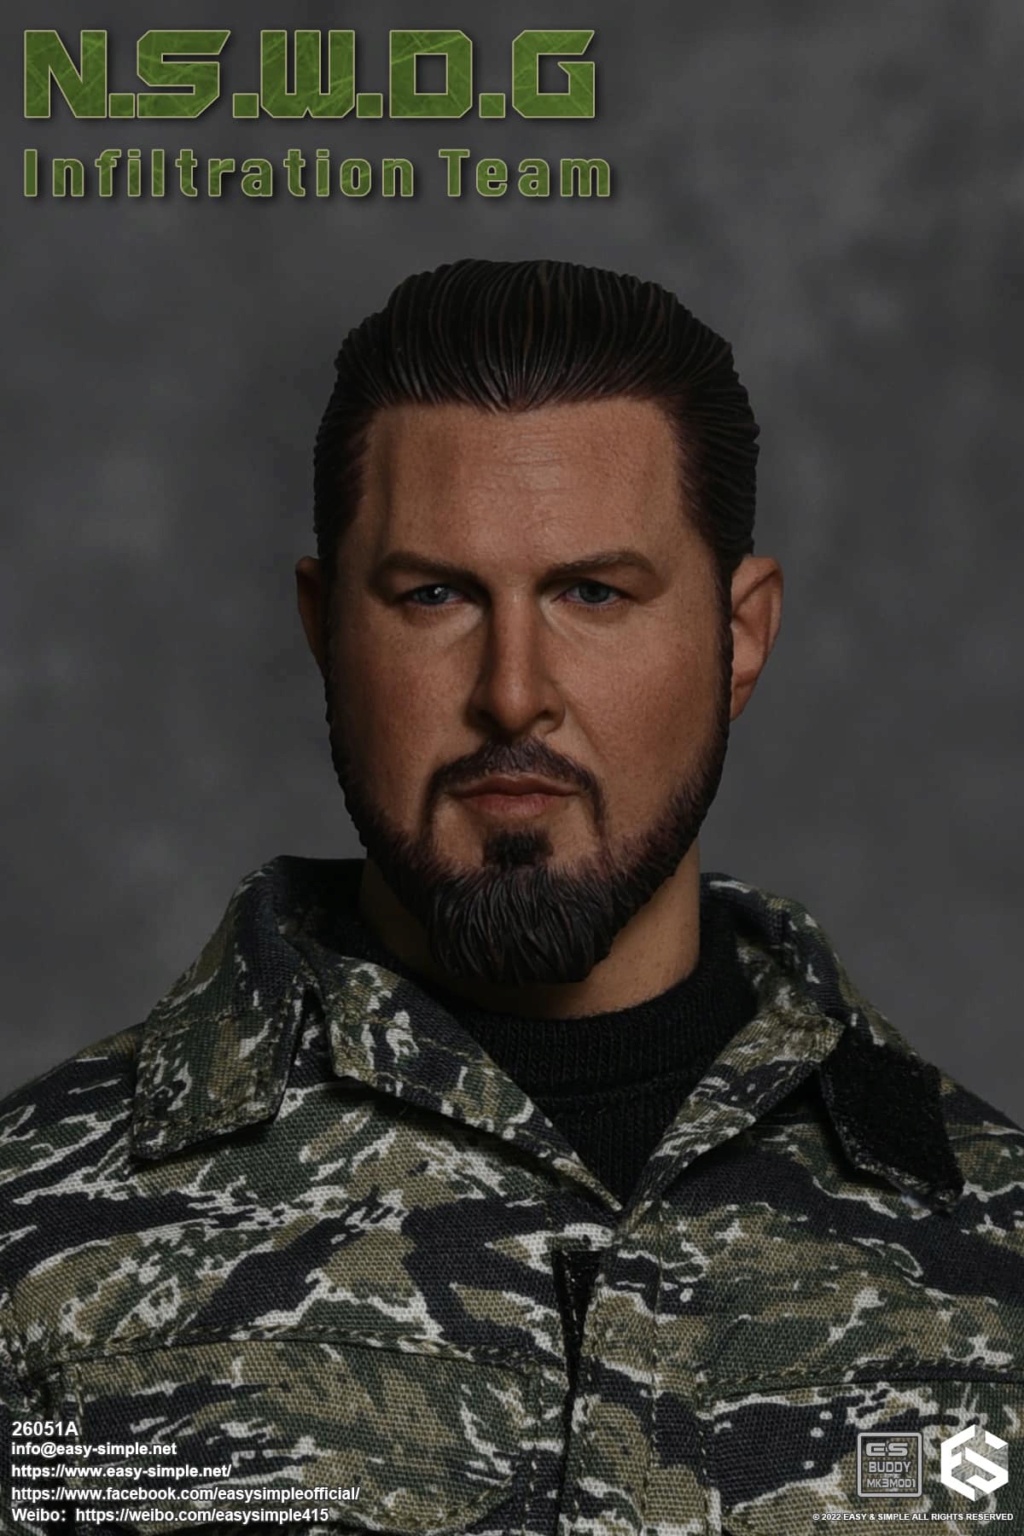 InfilitrationTeam - NEW PRODUCT: EASY AND SIMPLE 1/6 SCALE FIGURE: N.S.W.D.G INFILTRATION TEAM - (2 Versions) 27124